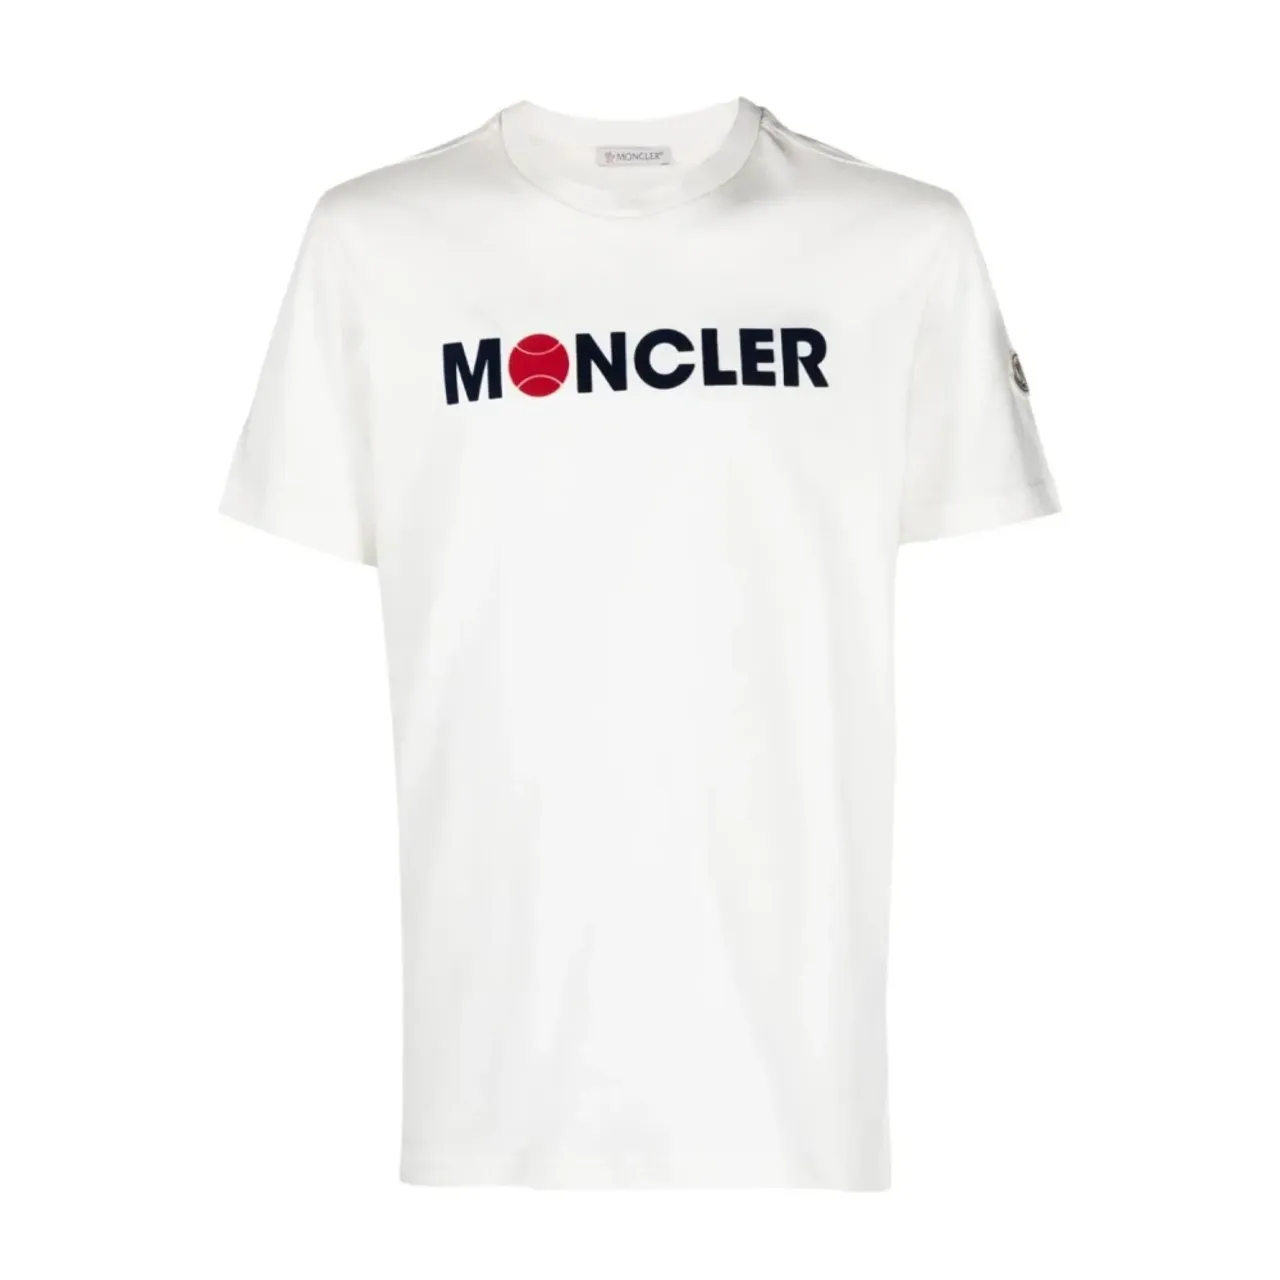 Moncler , Tennis-Inspired Cotton T-Shirt ,White male, Sizes: